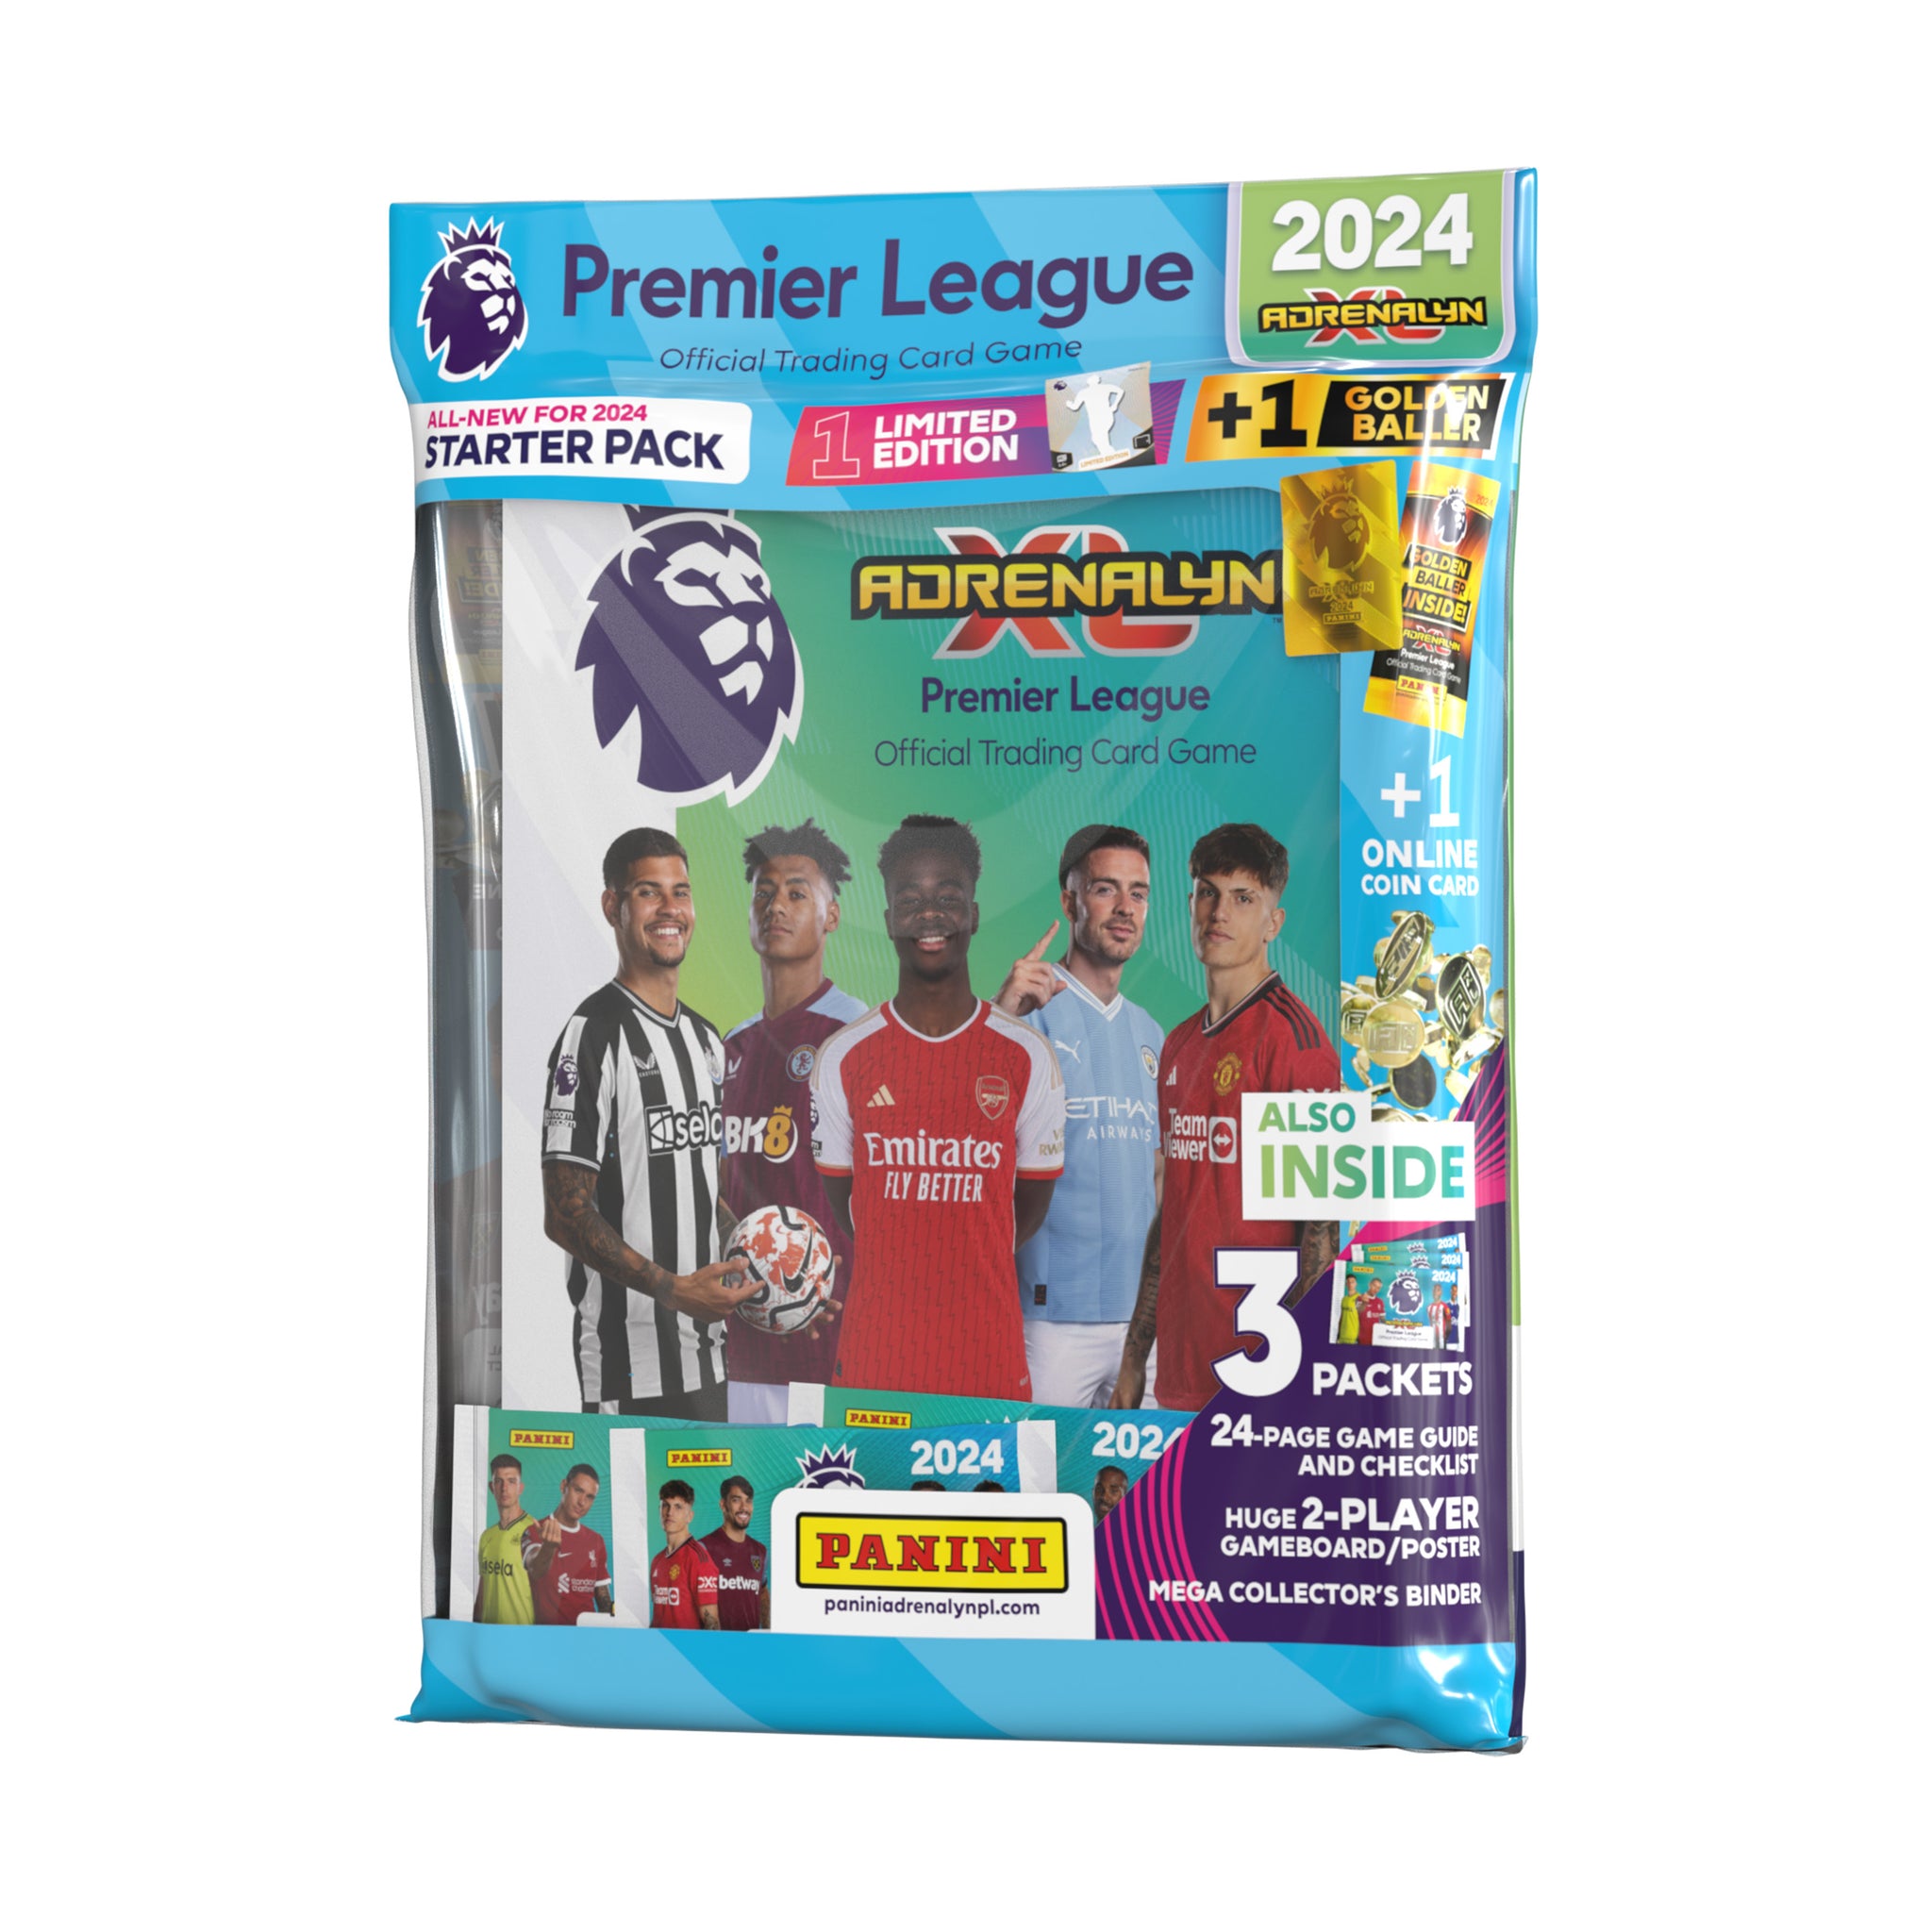 2023-24 PANINI ADRENALYN XL PREMIER LEAGUE CARDS - STARTER PACK (ALBUM, GAMEBOARD, 24 CARDS + LE)